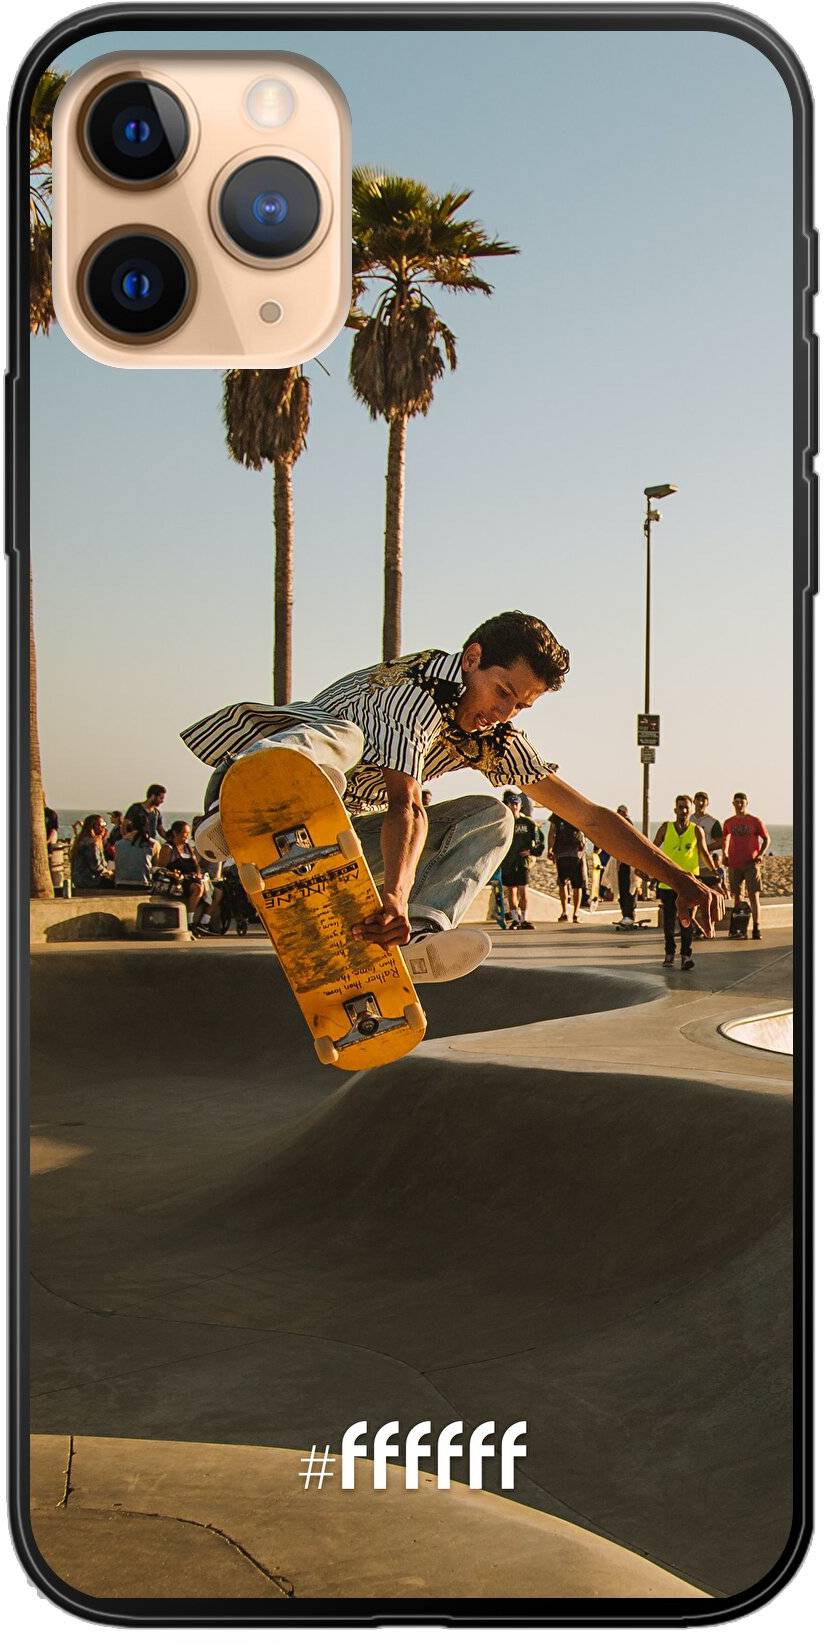 Let's Skate iPhone 11 Pro Max